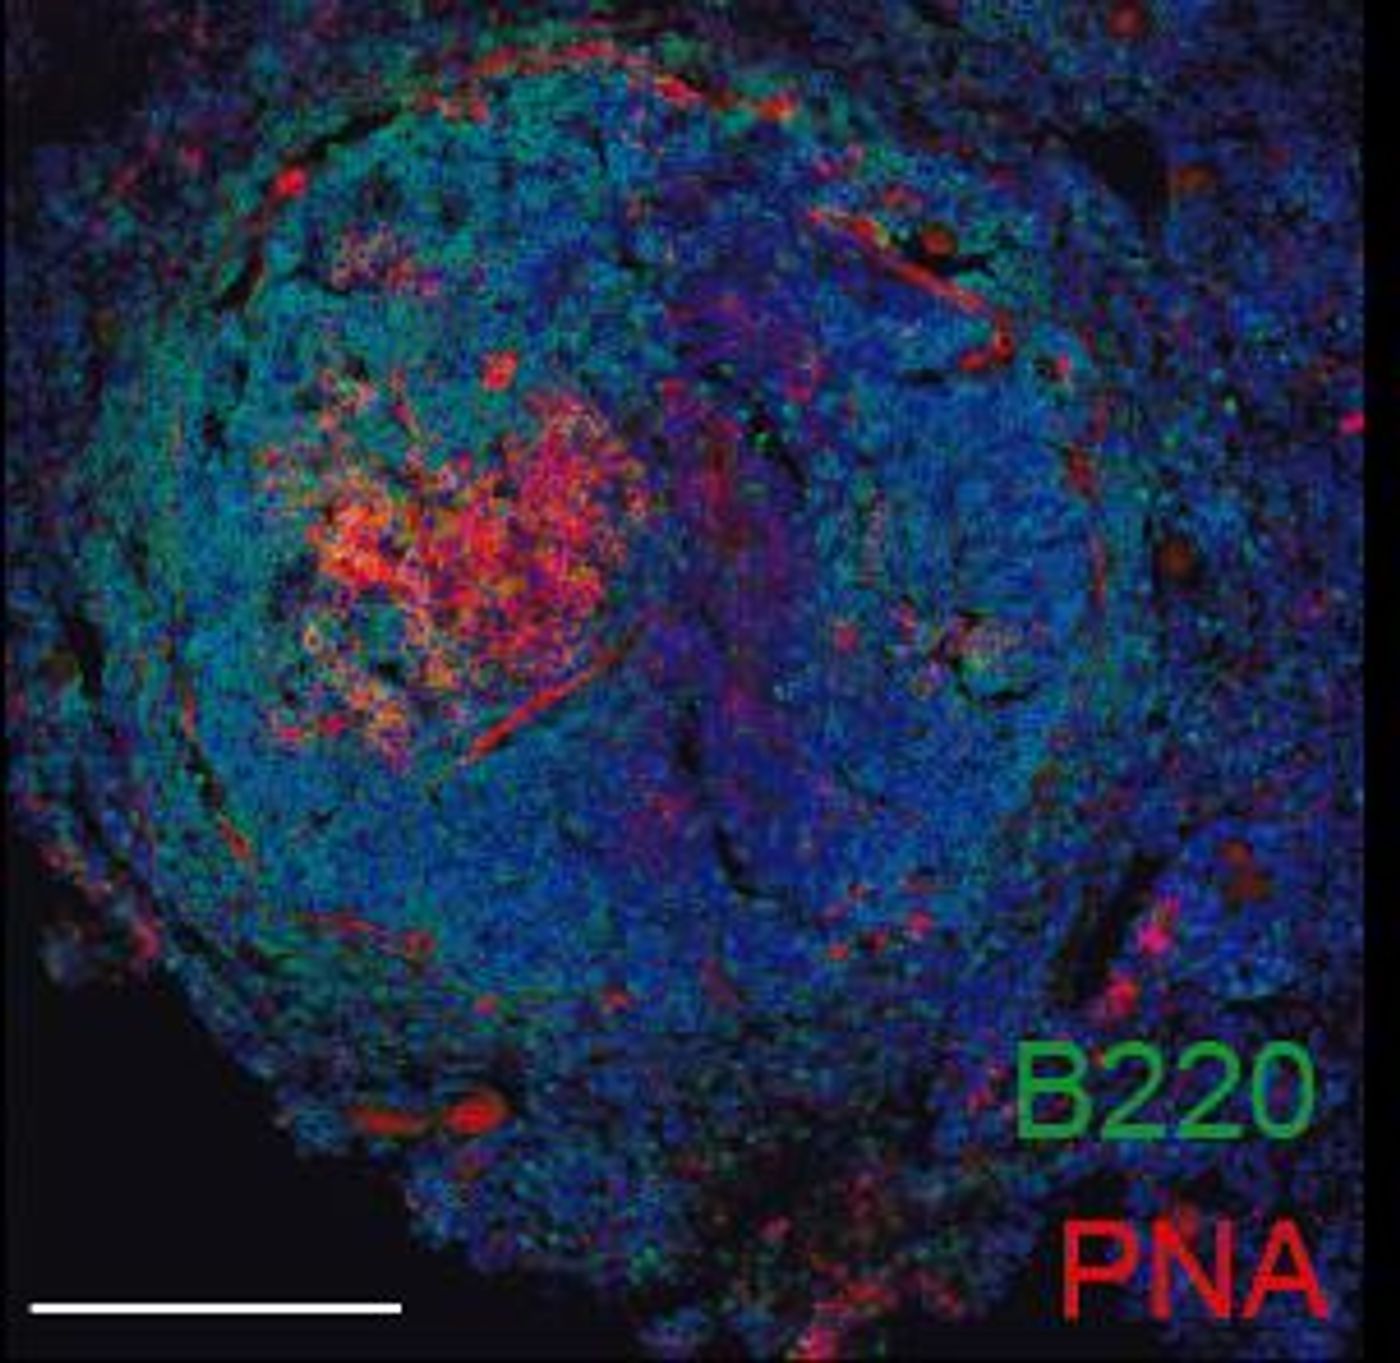 Germinal center response (red) in the spleen of an atherosclerosis-prone mice.  CREDIT CNIC